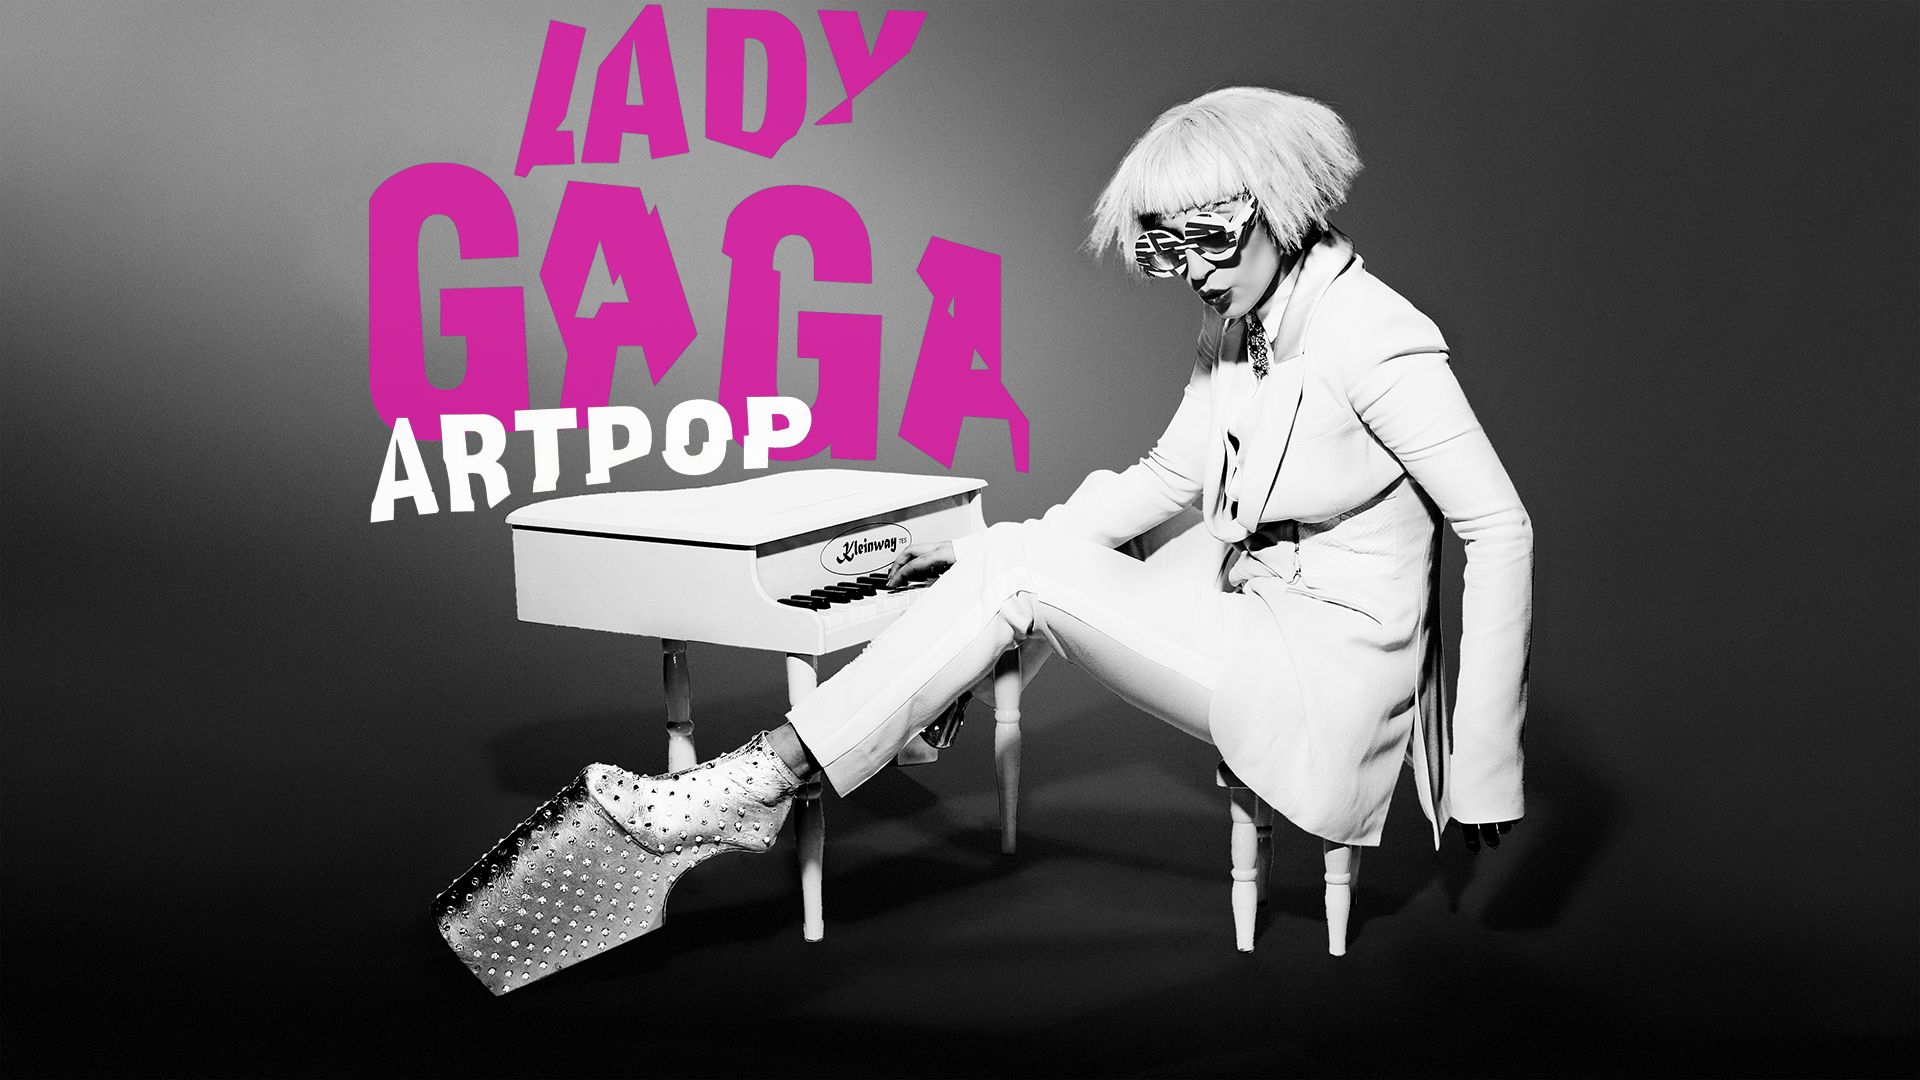 Download Lady Gaga wallpapers for mobile phone free Lady Gaga HD  pictures